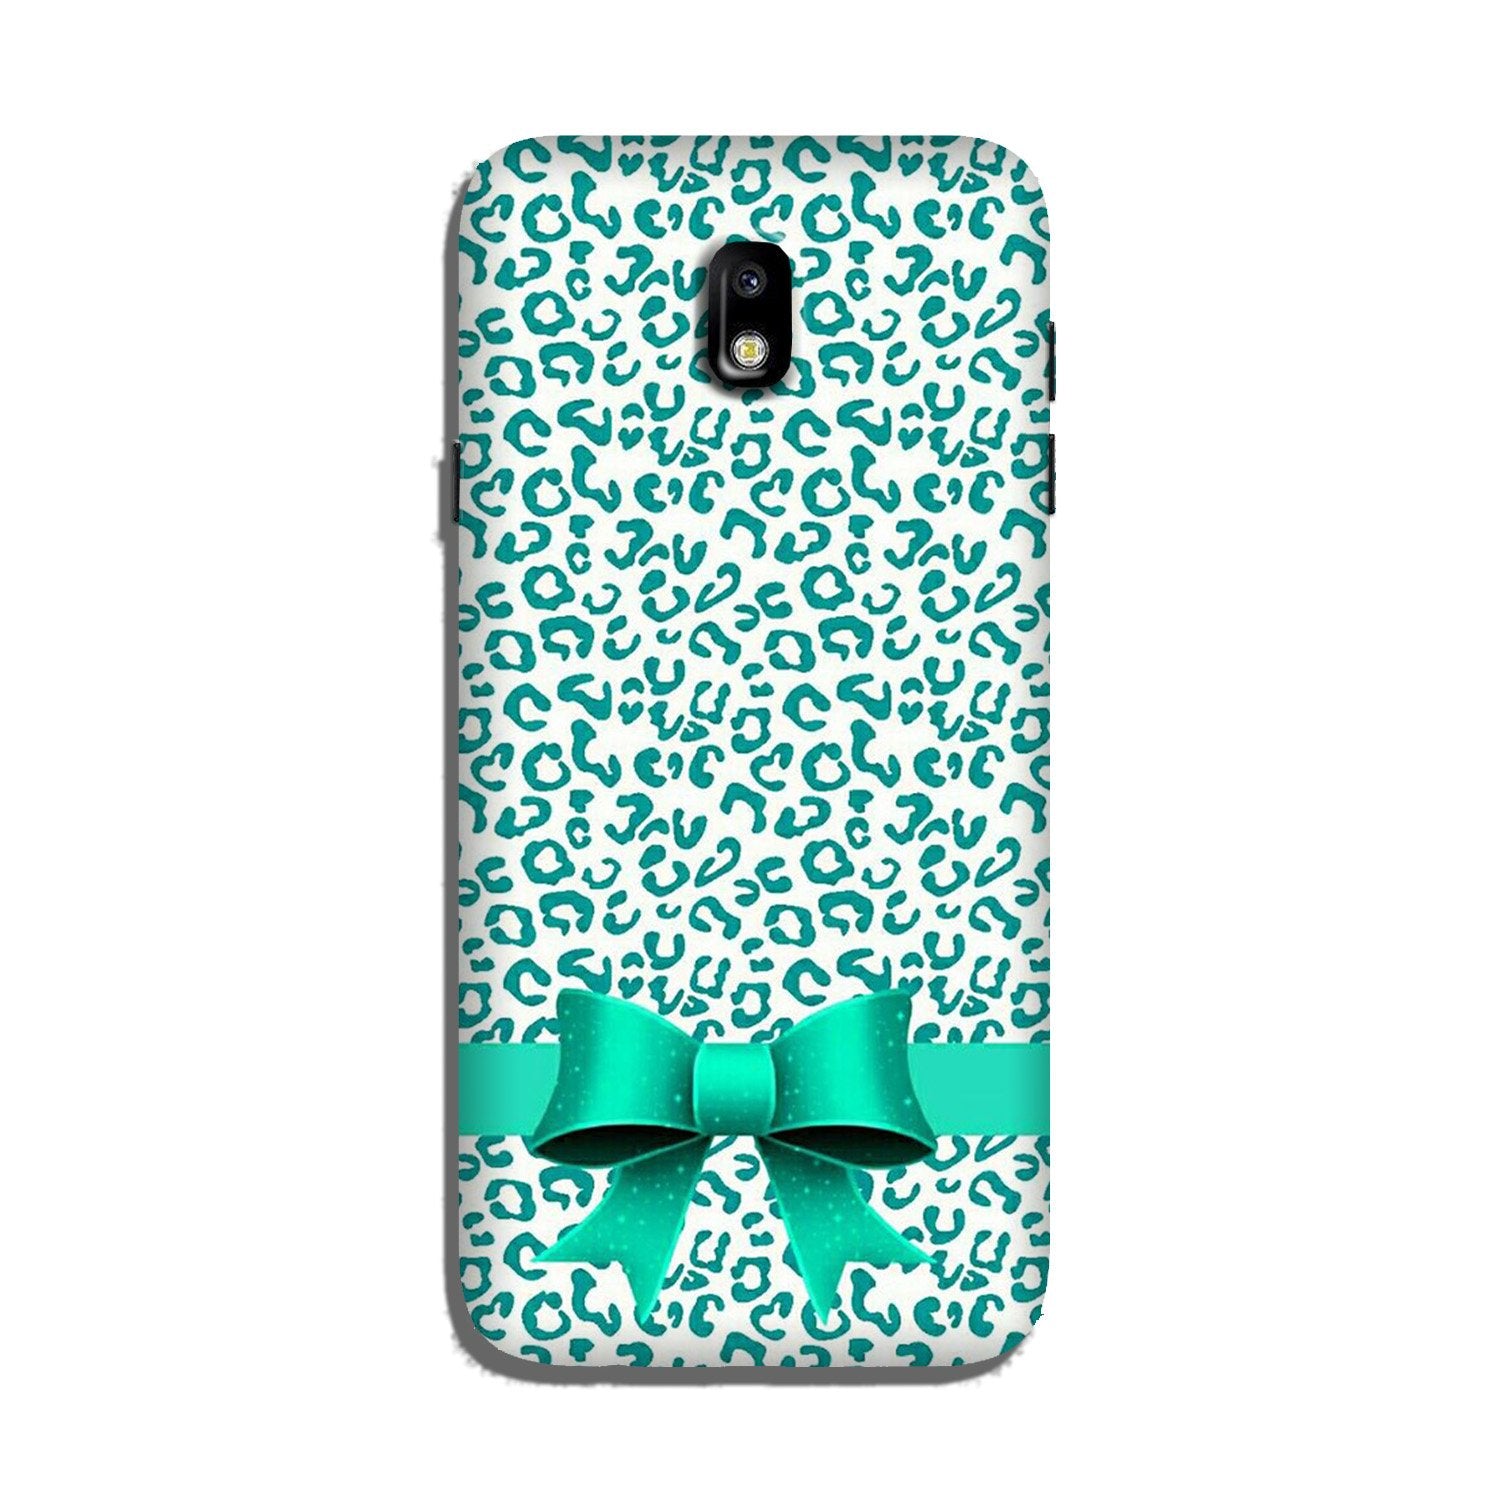 Gift Wrap6 Case for Galaxy J7 Pro